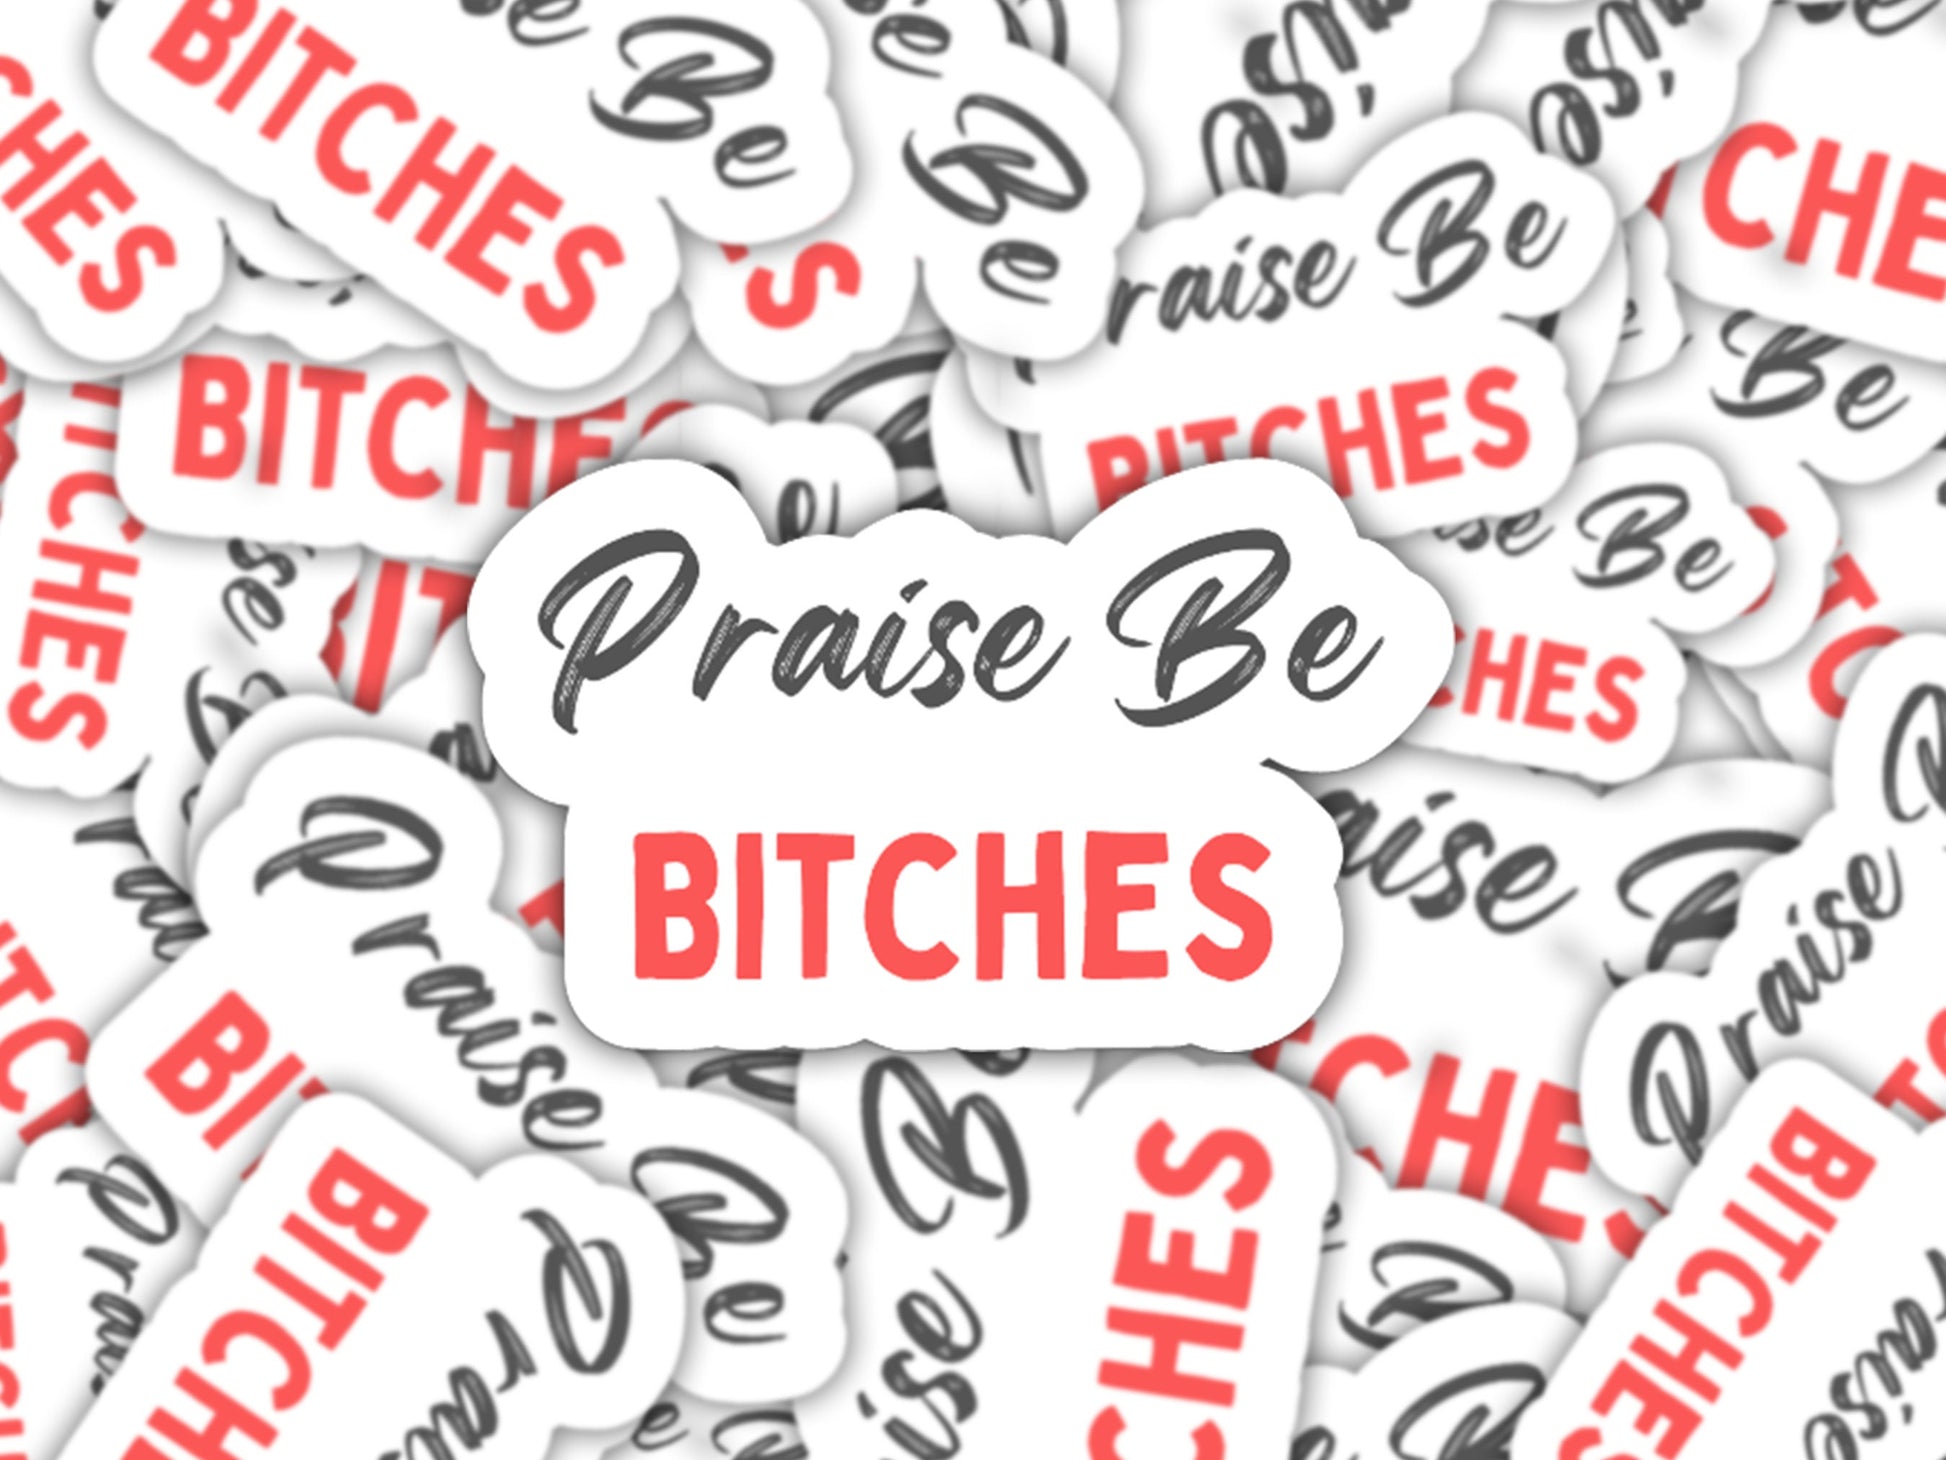 praise be bitches sticker, feminism movement, pro choice sticker, feminist sticker, handmaid’s tale gift, abortion-rights, gifts for her